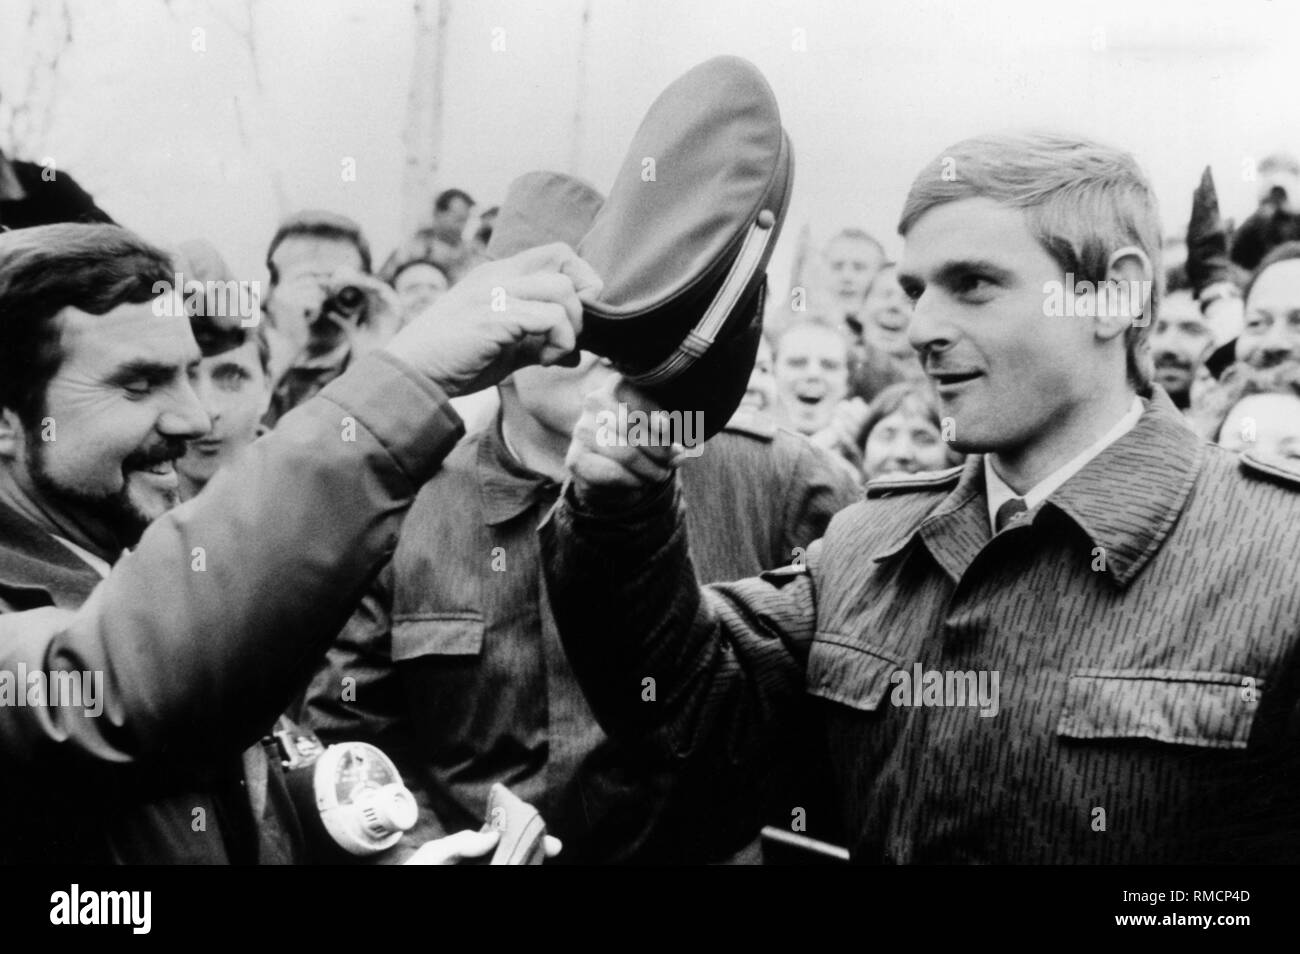 West Berlin policeman and East German Border Guard soldier in the crowd after the wall opening. The policeman hands his cap to the borderman. Stock Photo